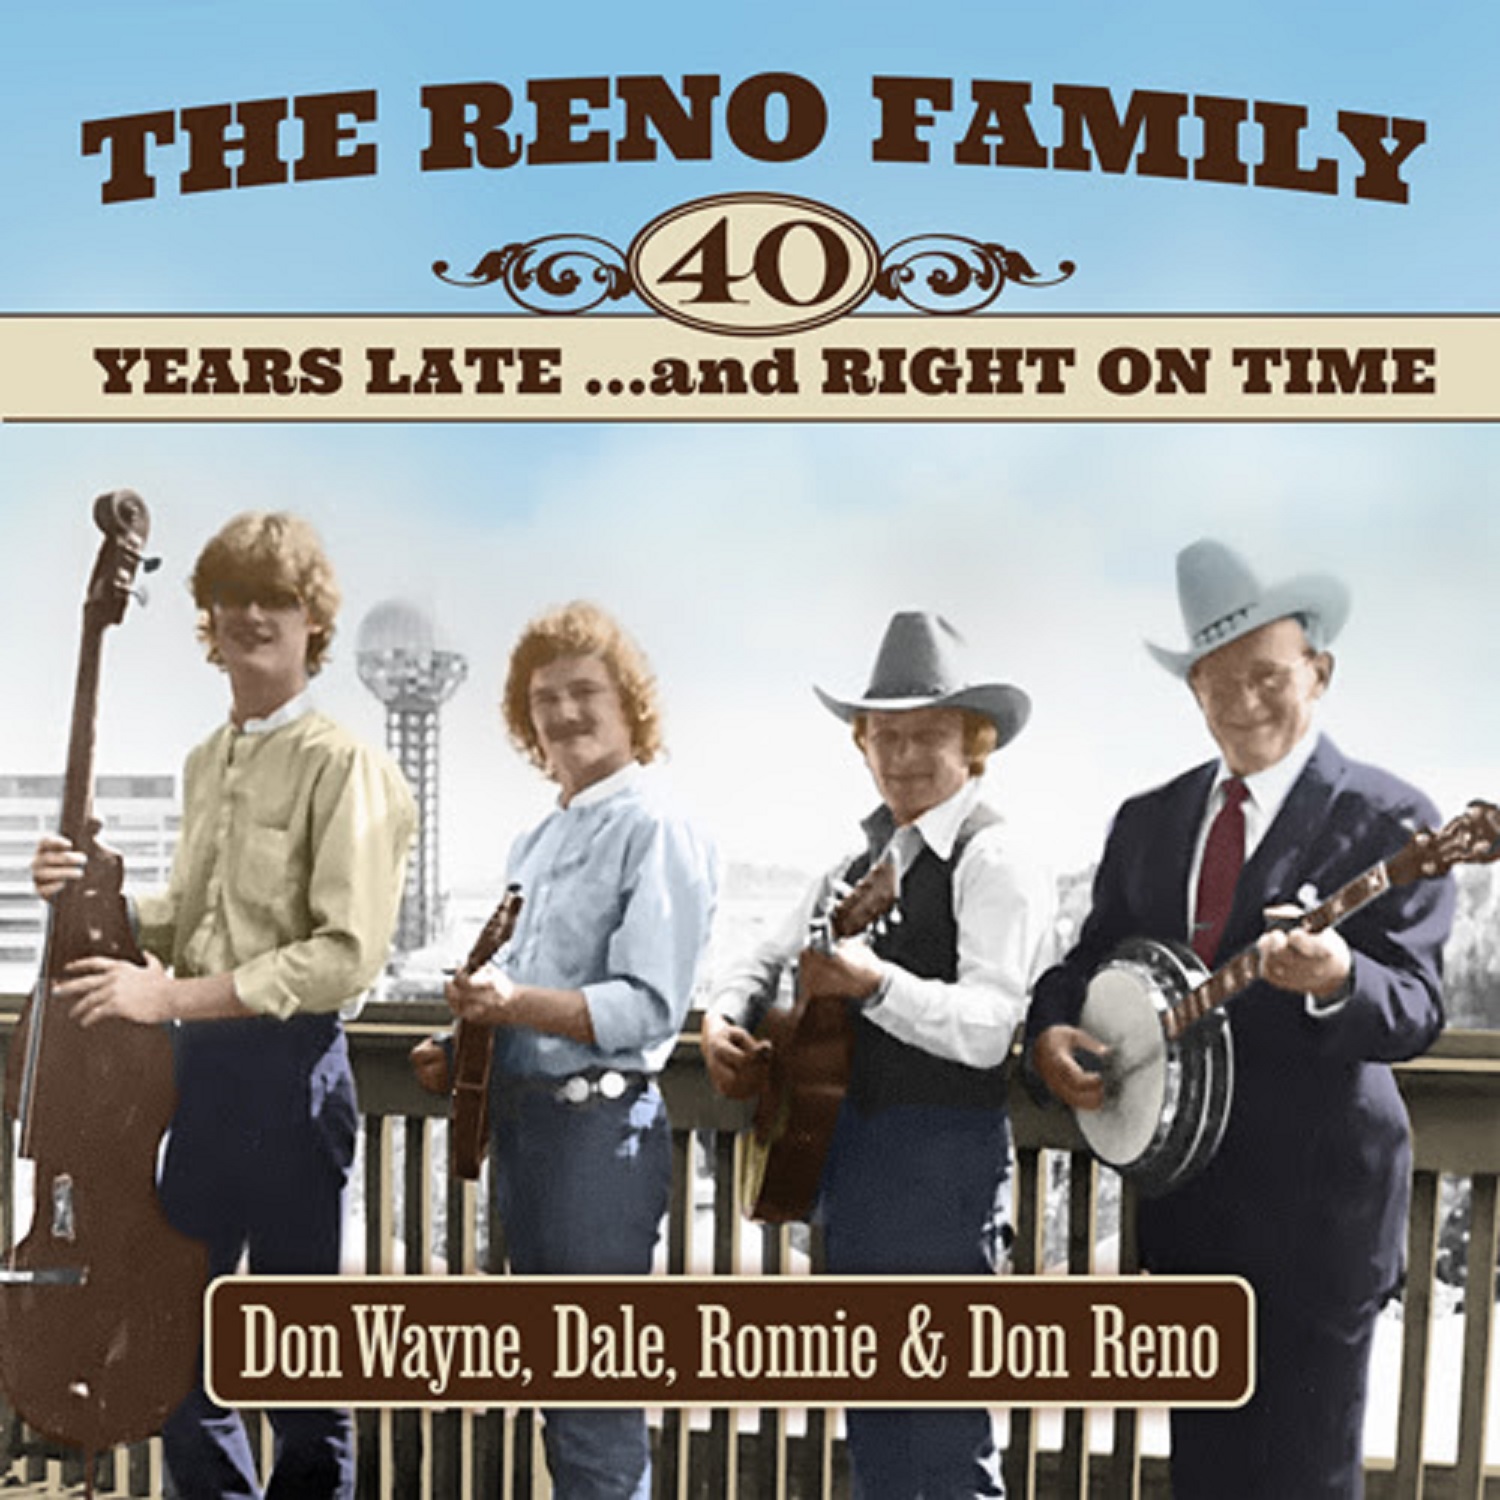 THE RENO FAMILY NEVER-BEFORE RELEASED HERITAGE STUDIO RECORDINGS 40 YEARS LATE…and RIGHT ON TIME